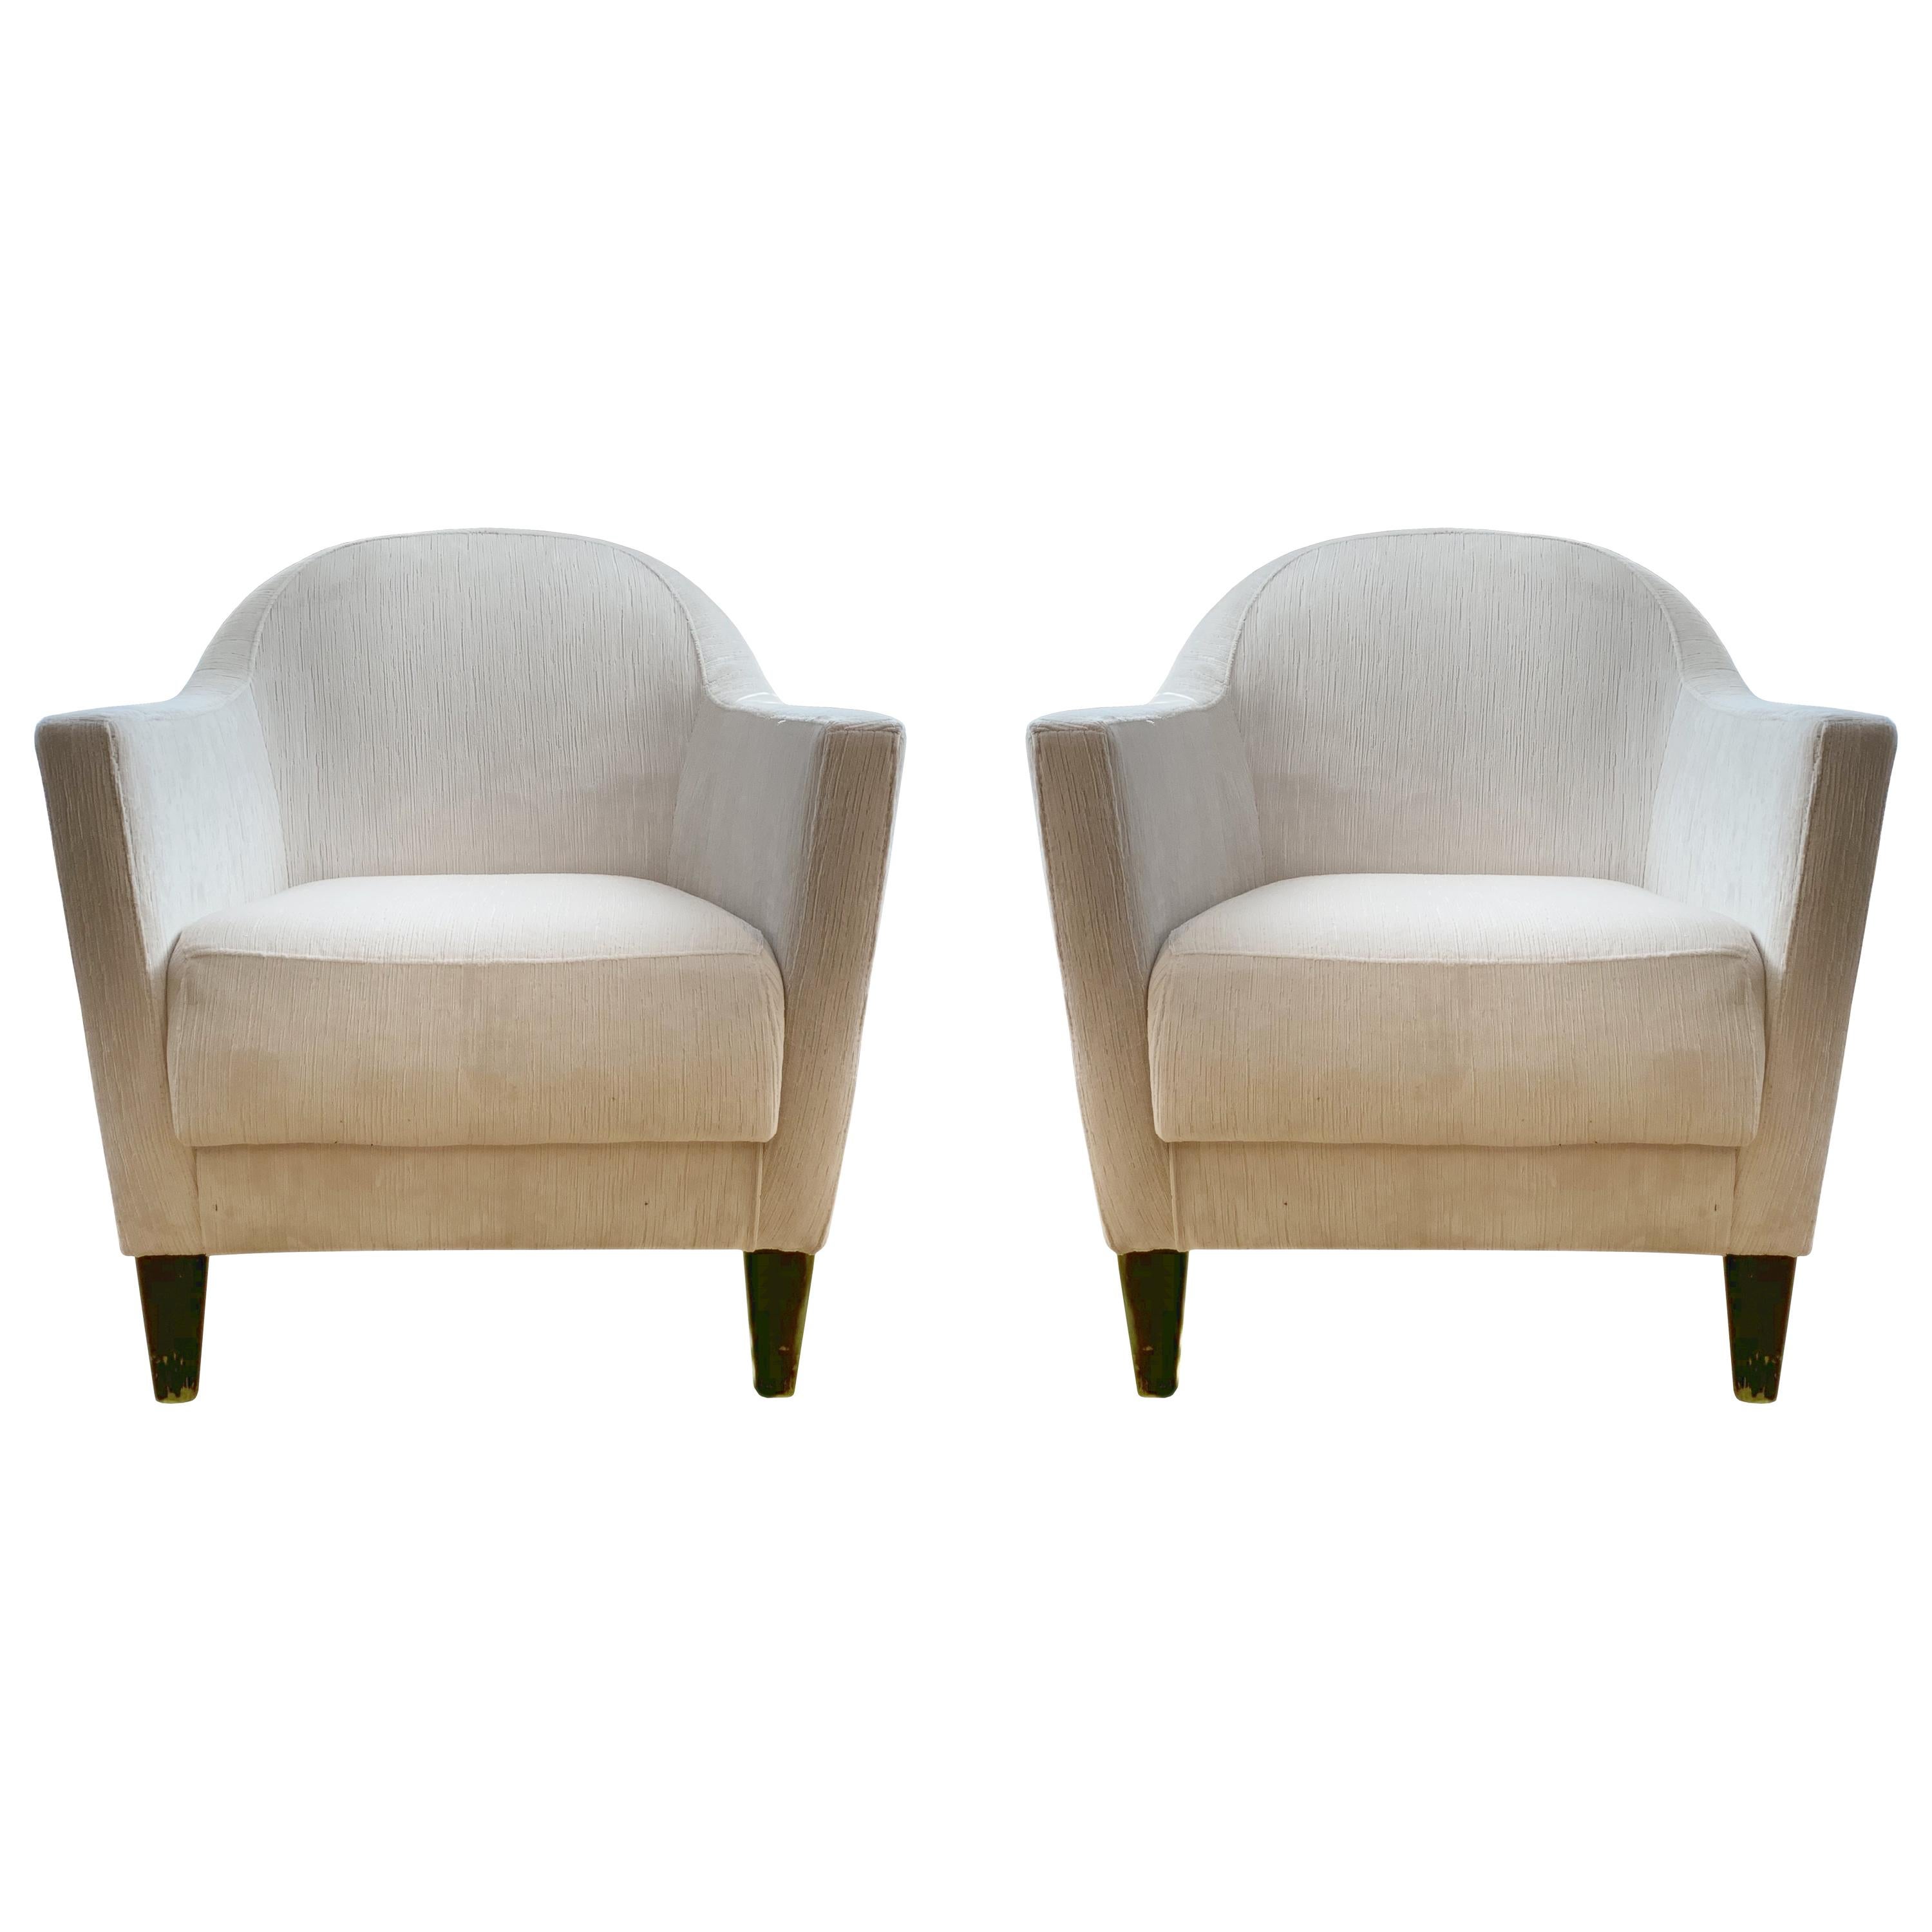 Pair of 1960s Armchairs in Cream Color Fabric, Newly Upholstered